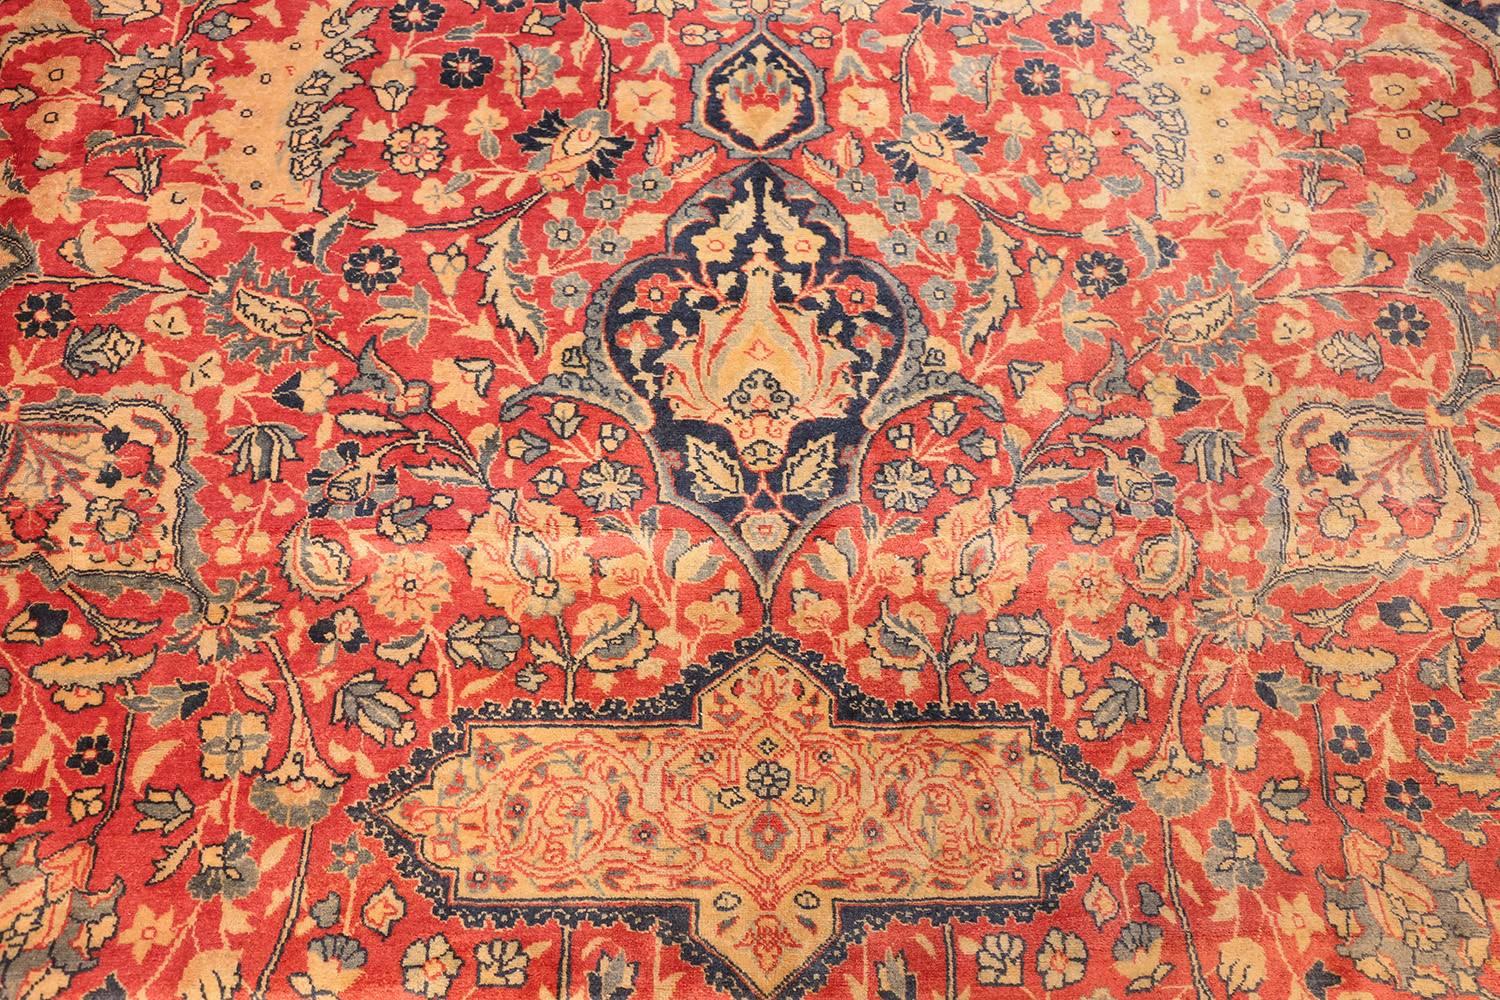 20th Century Antique Persian Tabriz Carpet. Size: 14 ft 10 in x 21 ft 5 in (4.52 m x 6.53 m)